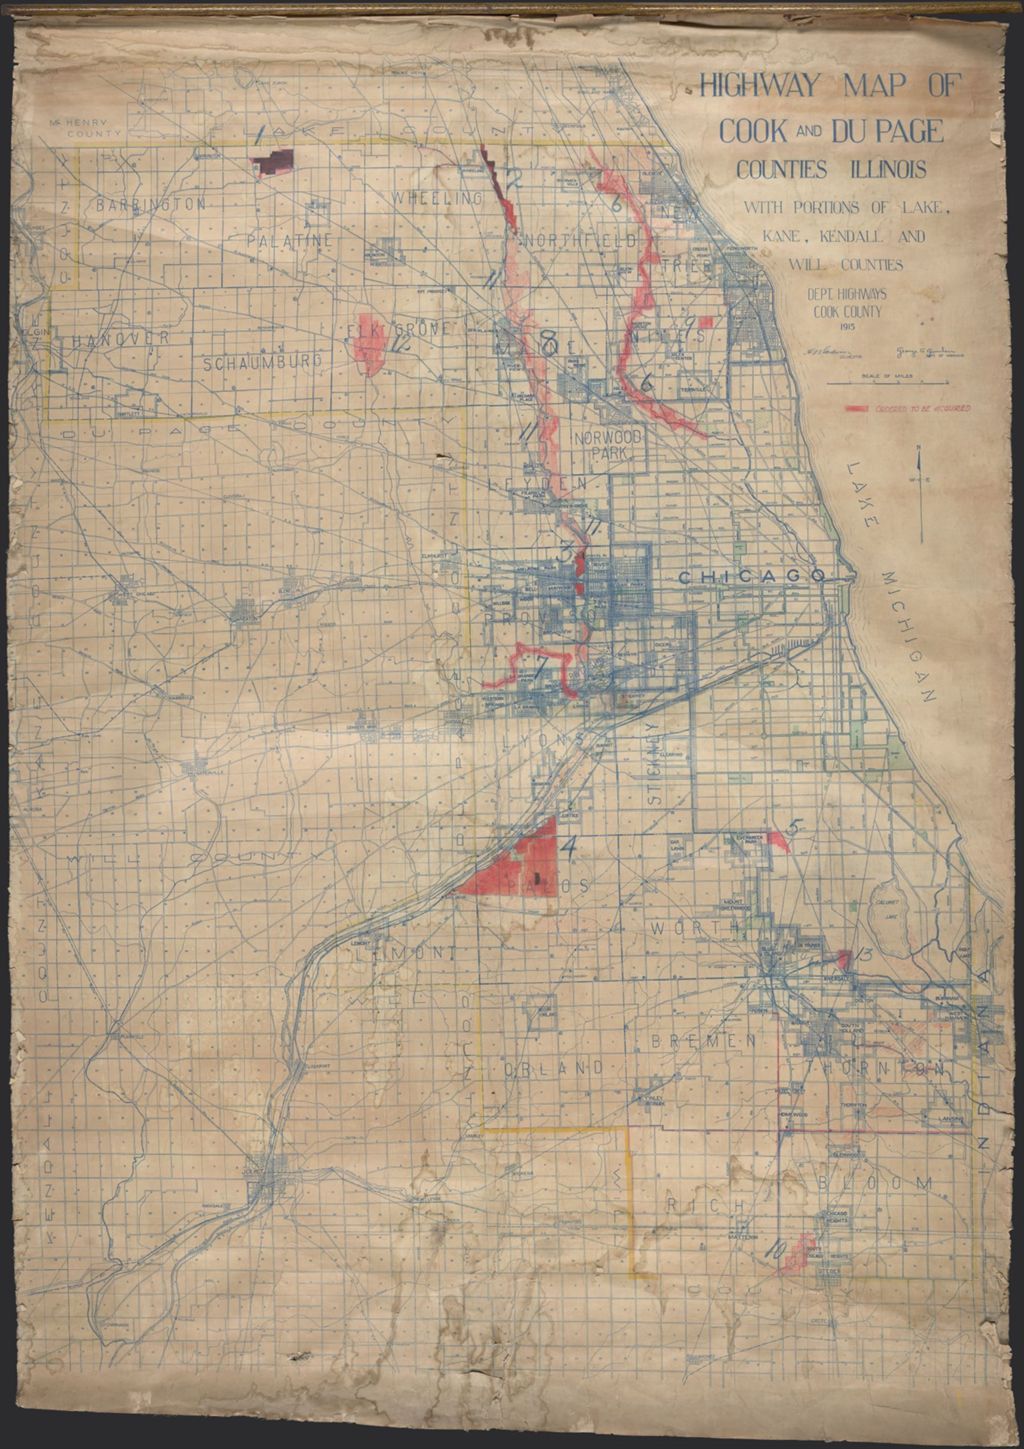 Miniature of Original Working Map used by Dwight Perkins, re: Recommended Acquisitions for initial Forest Preserve District